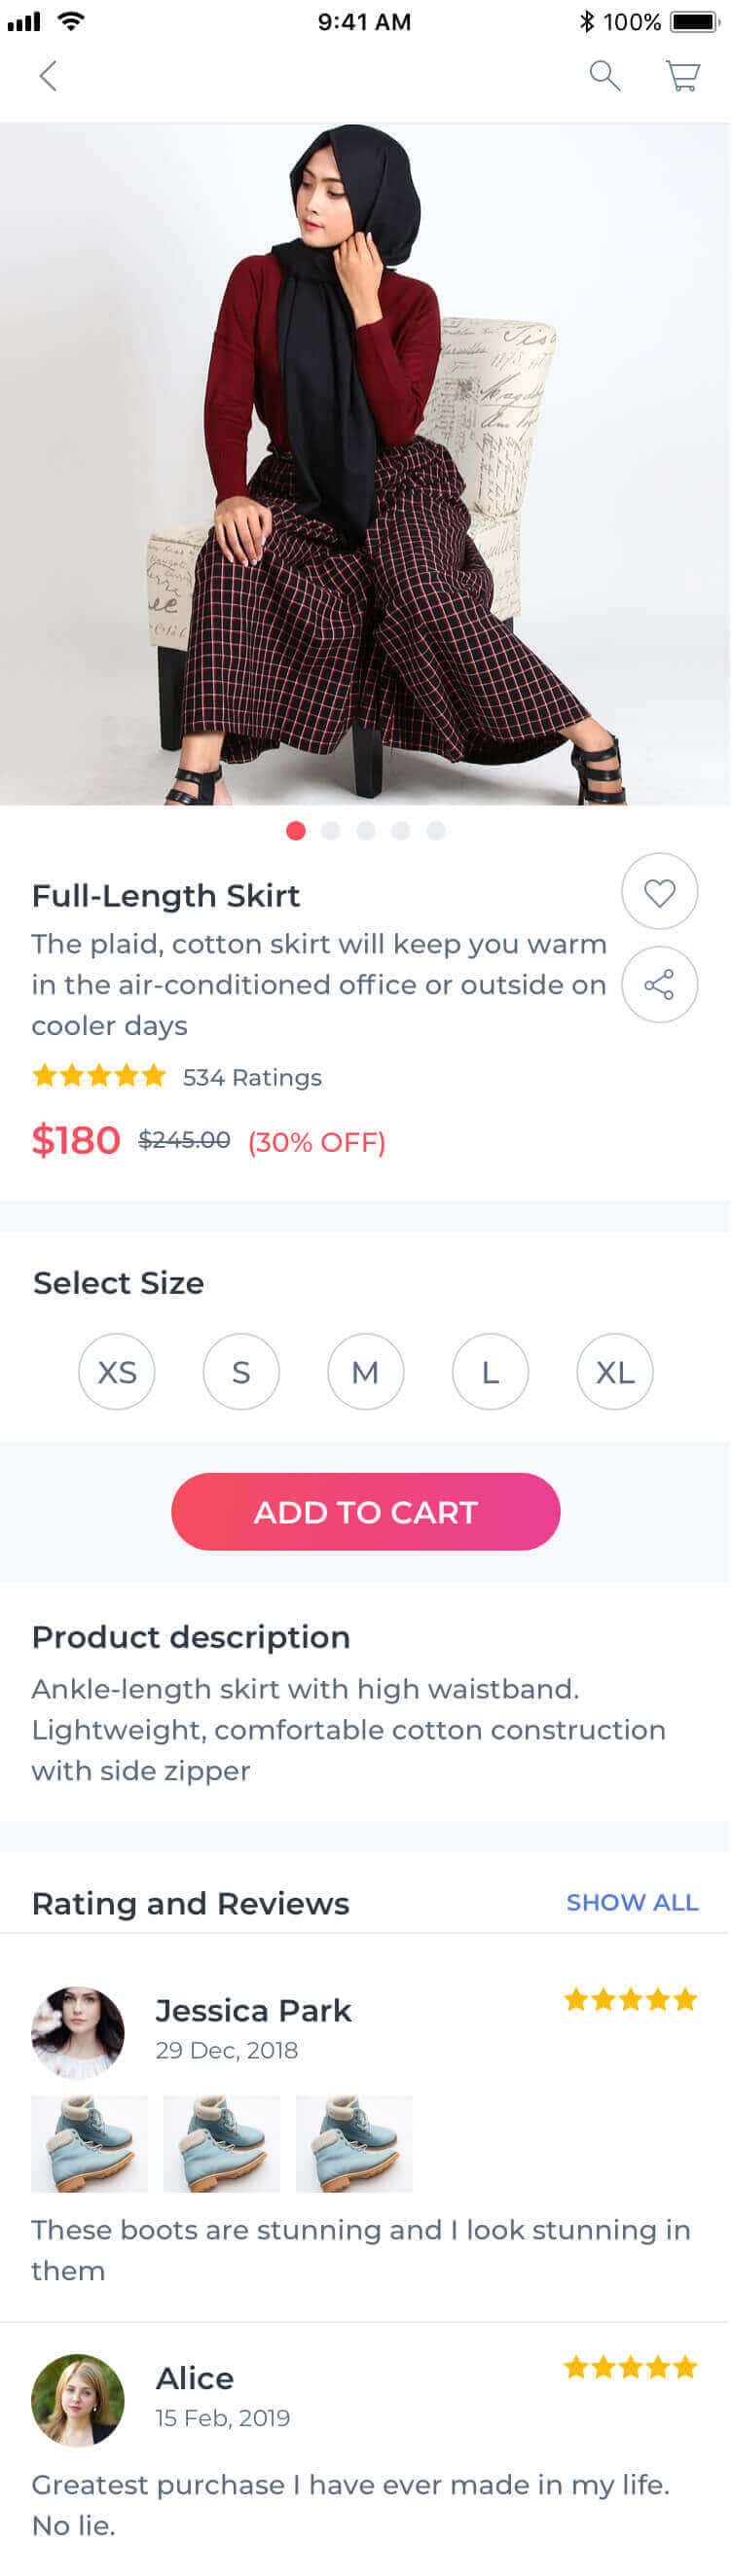 Ecommerce Check out Template